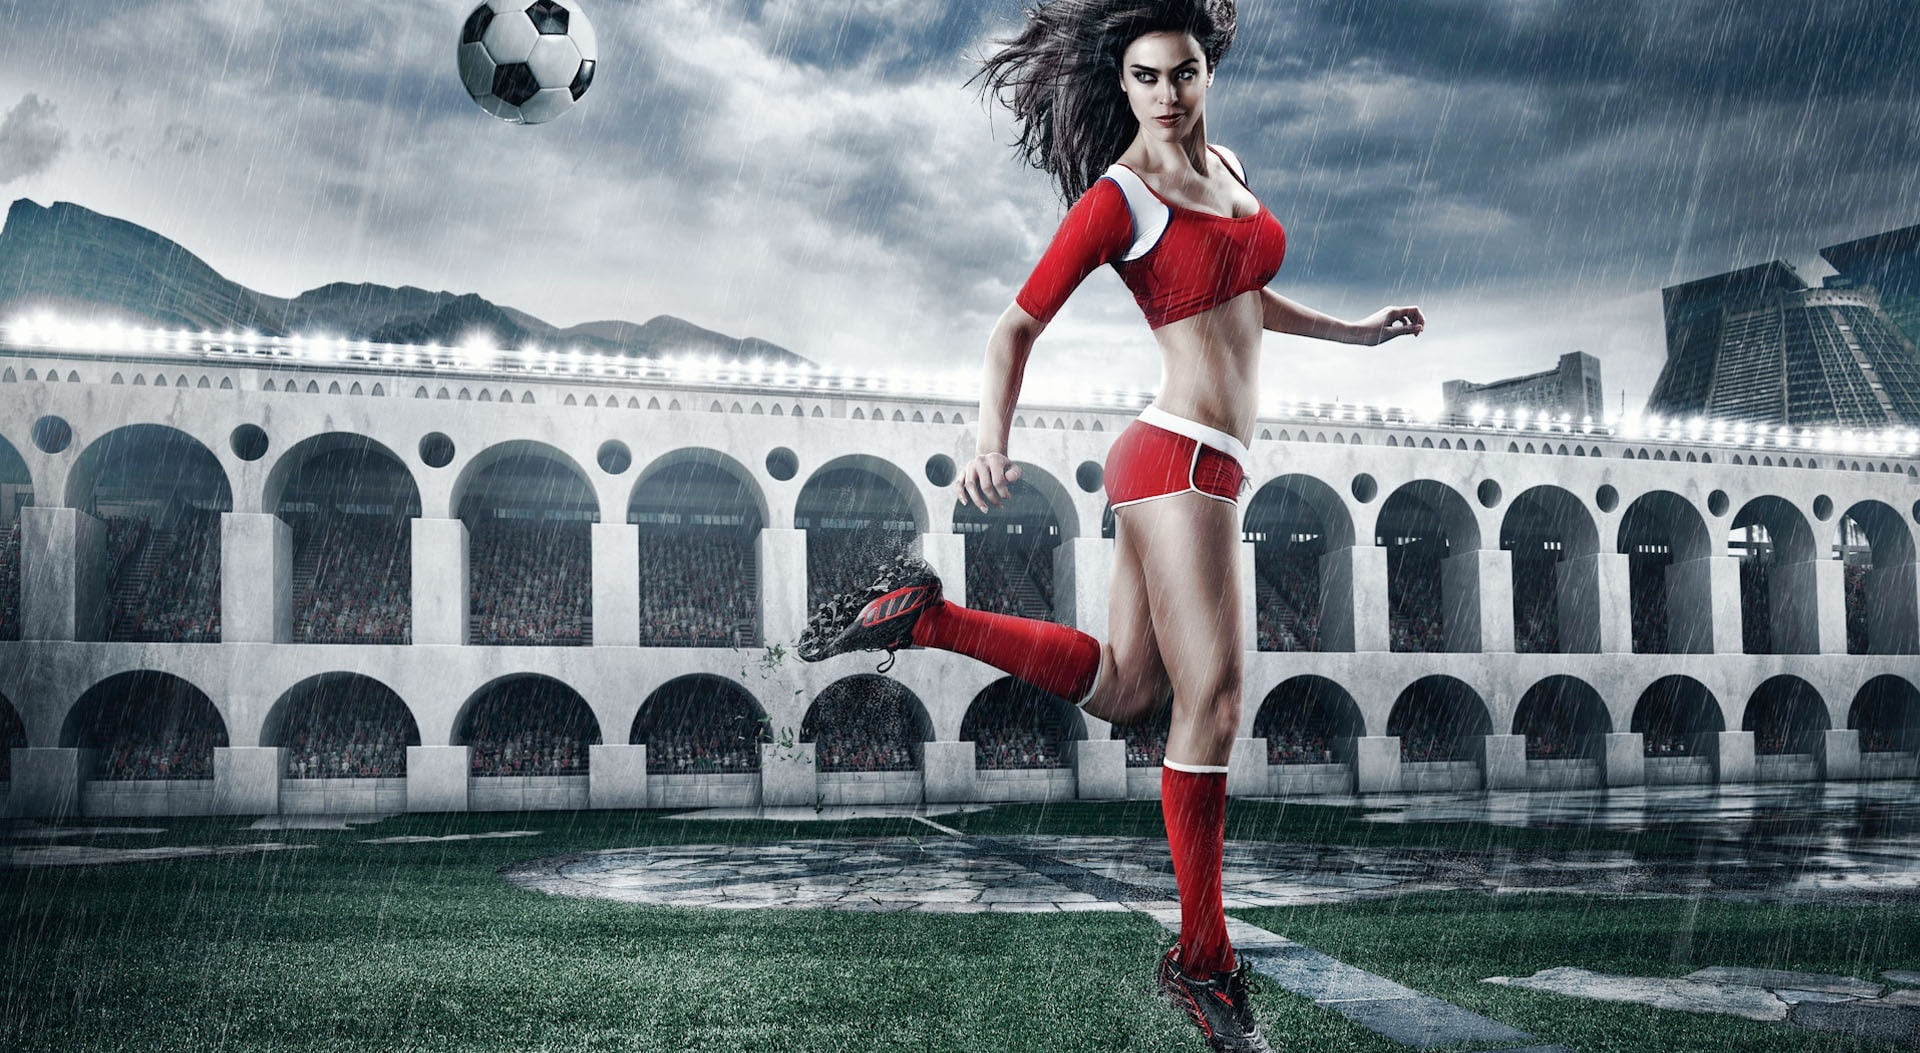 World Cup Brazil 2014, women's red and white long-sleeved crop top